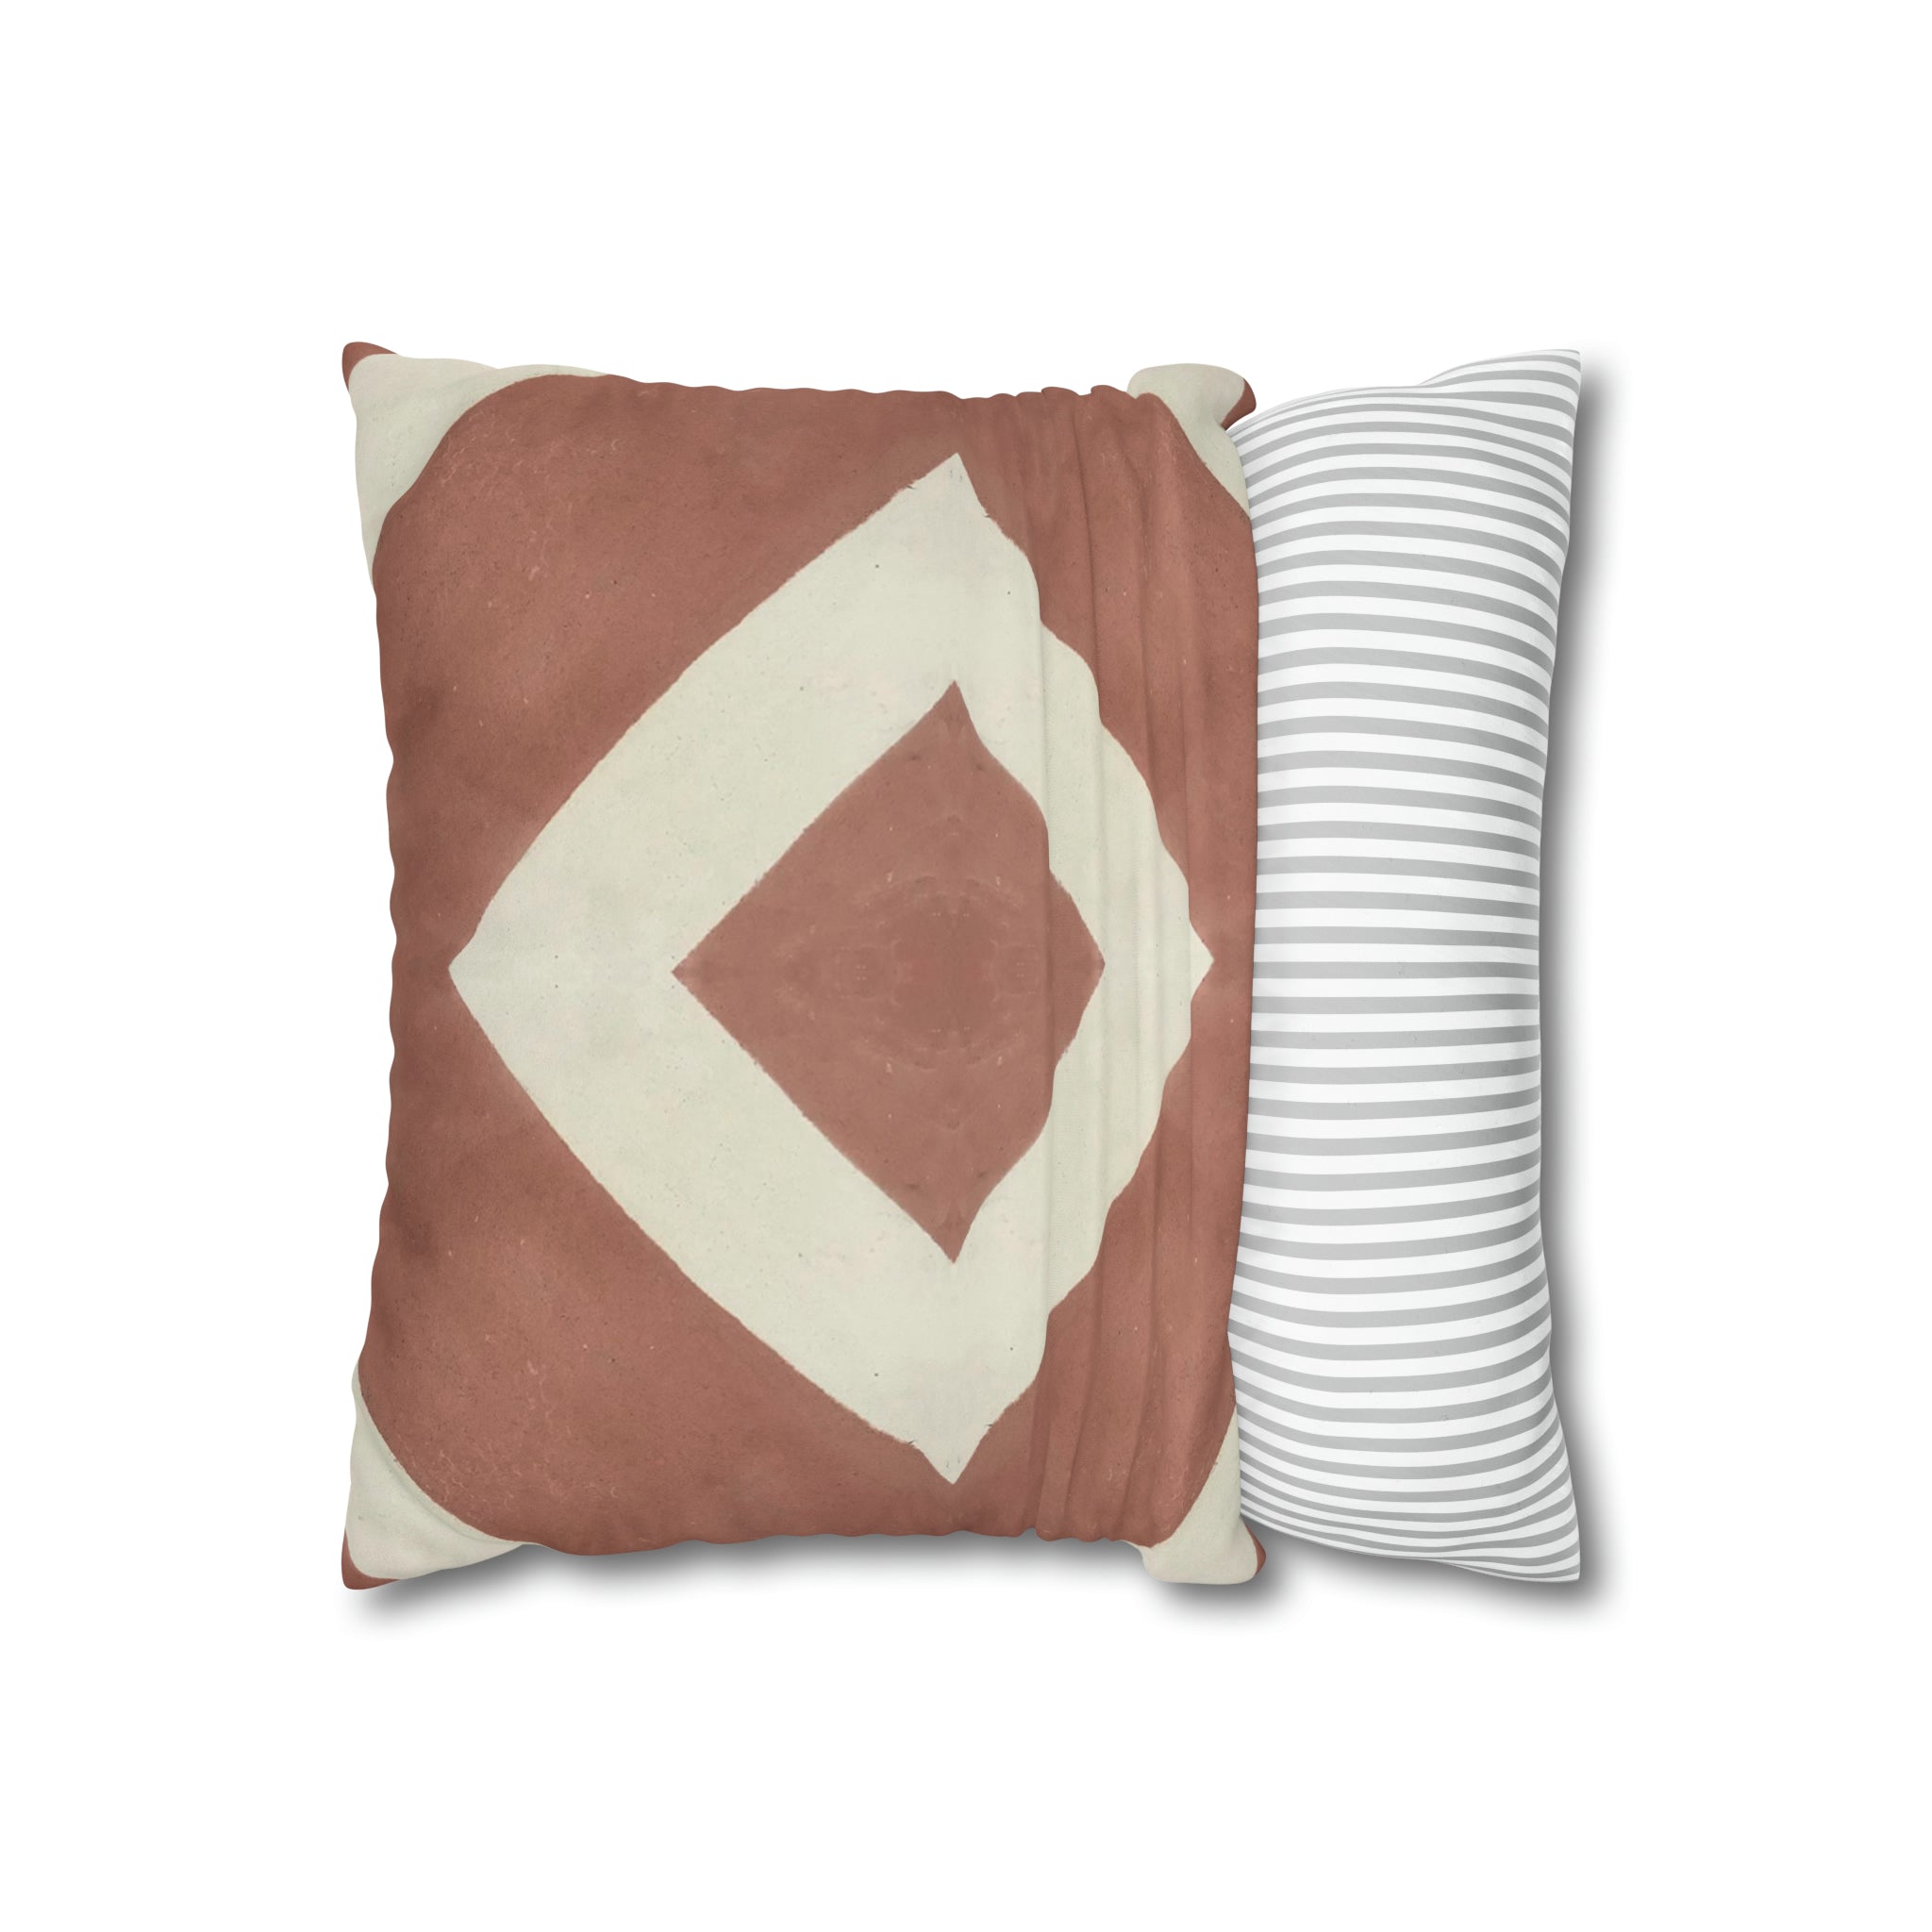 a brown and white pillow sitting next to a striped pillow